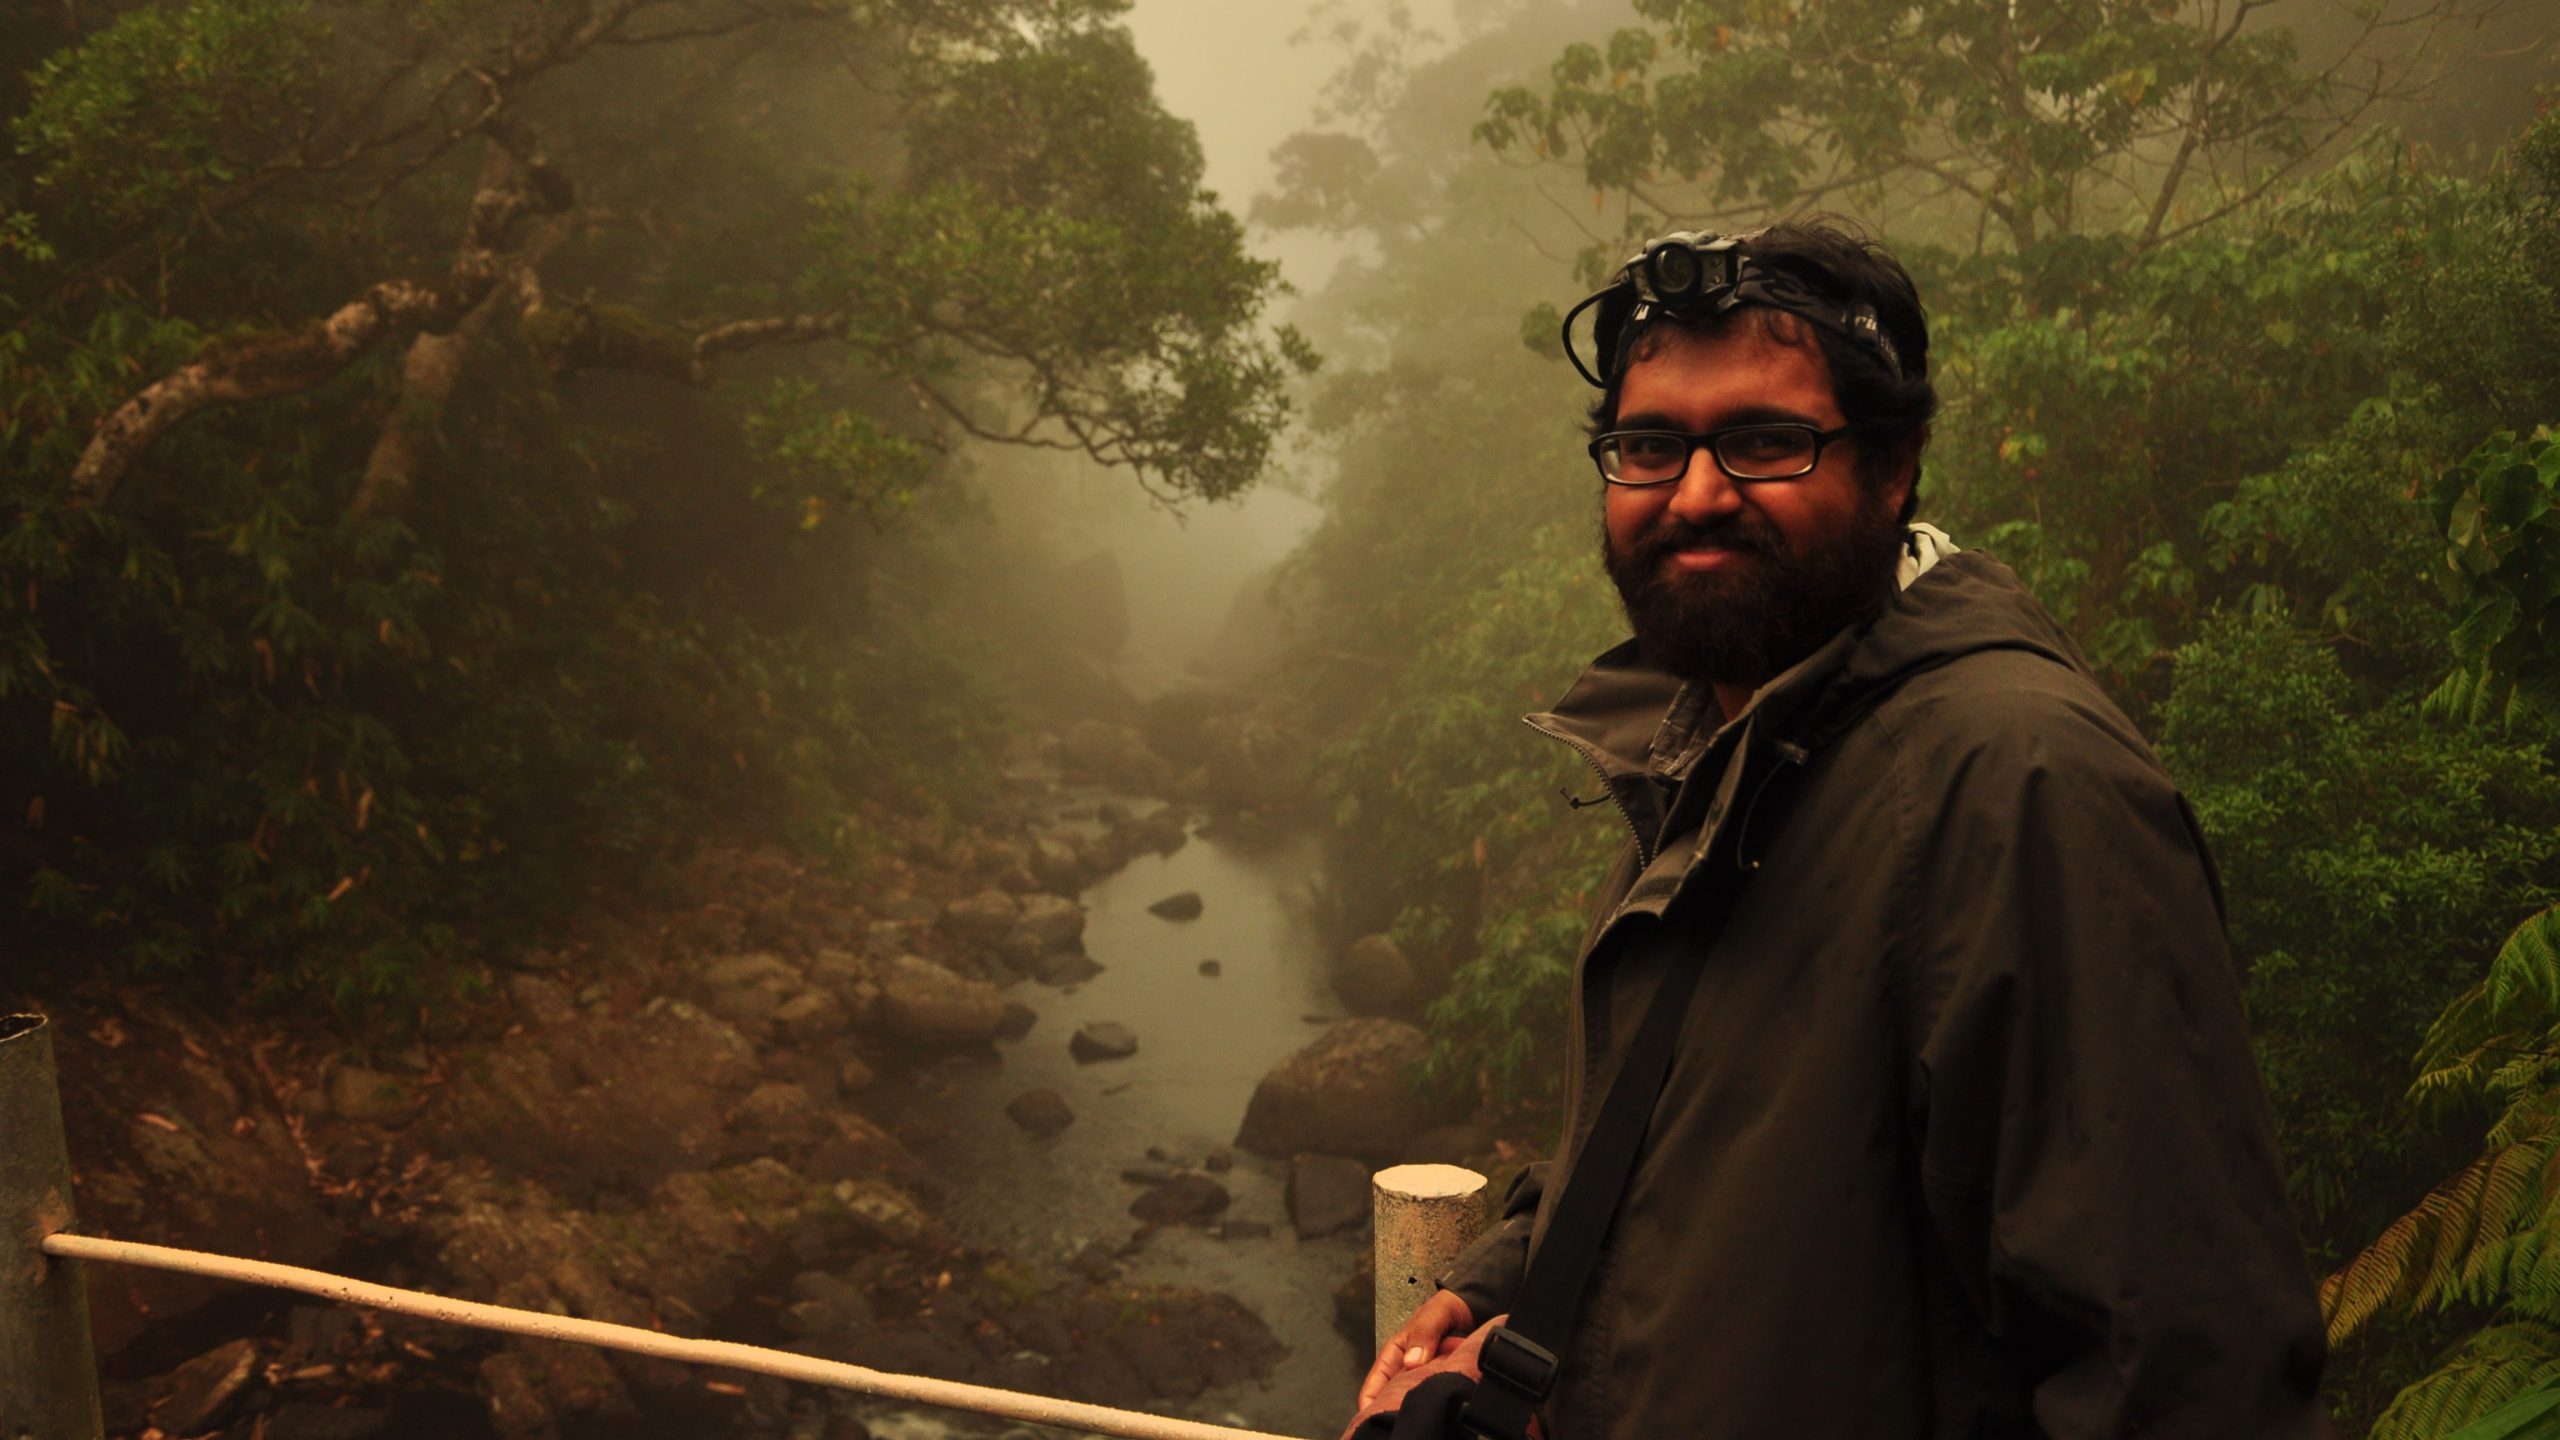 Episode 21: Wetland and Grassland Birds from the Man who Discovered a Frog: with Seshadri K.S.